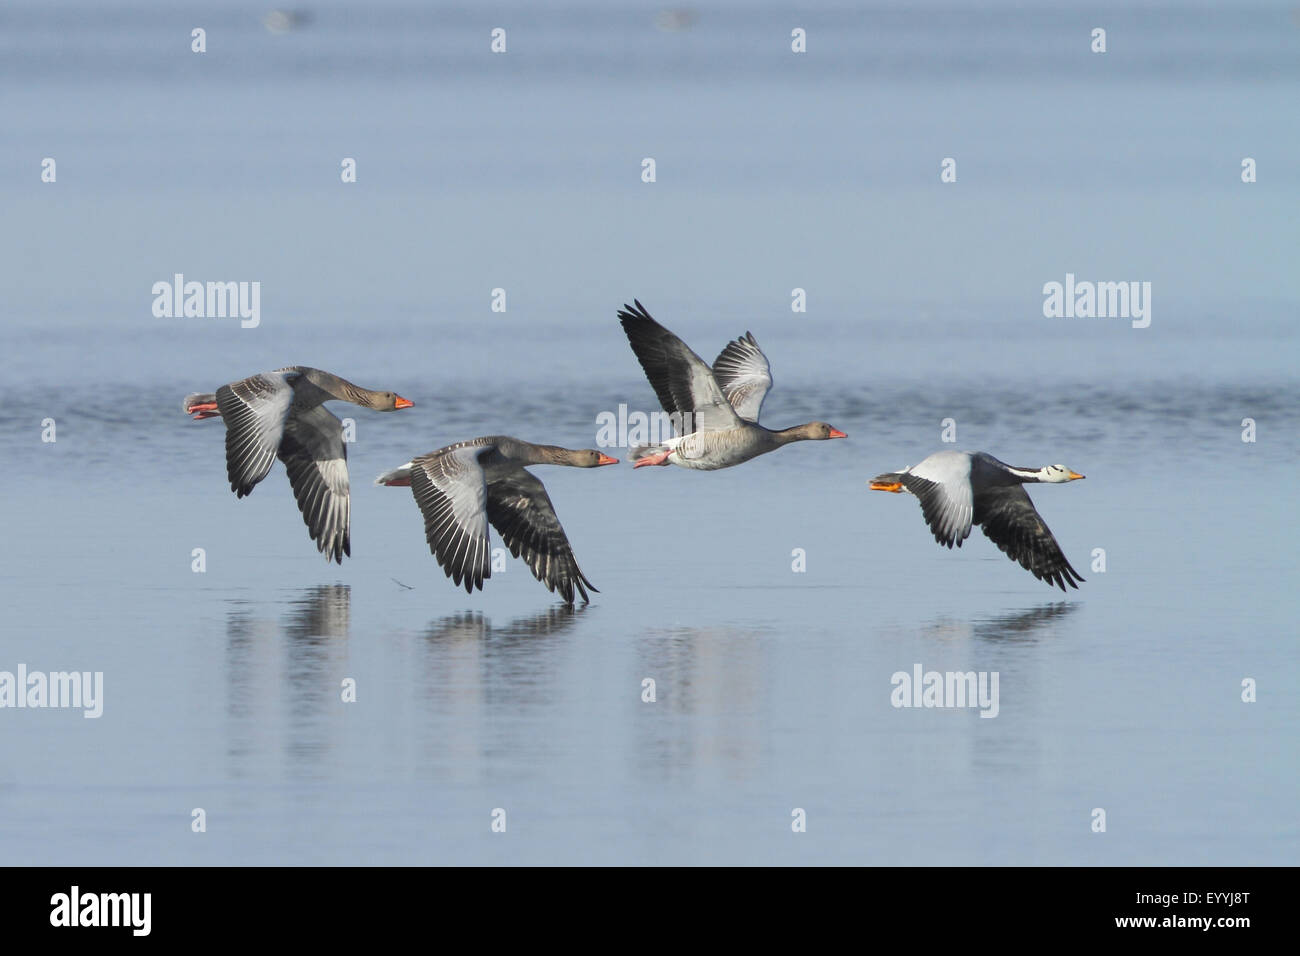 bar-headed goose (Anser indicus), flying with greylag geese nearby the water surface, Germany, Bavaria, Lake Chiemsee Stock Photo